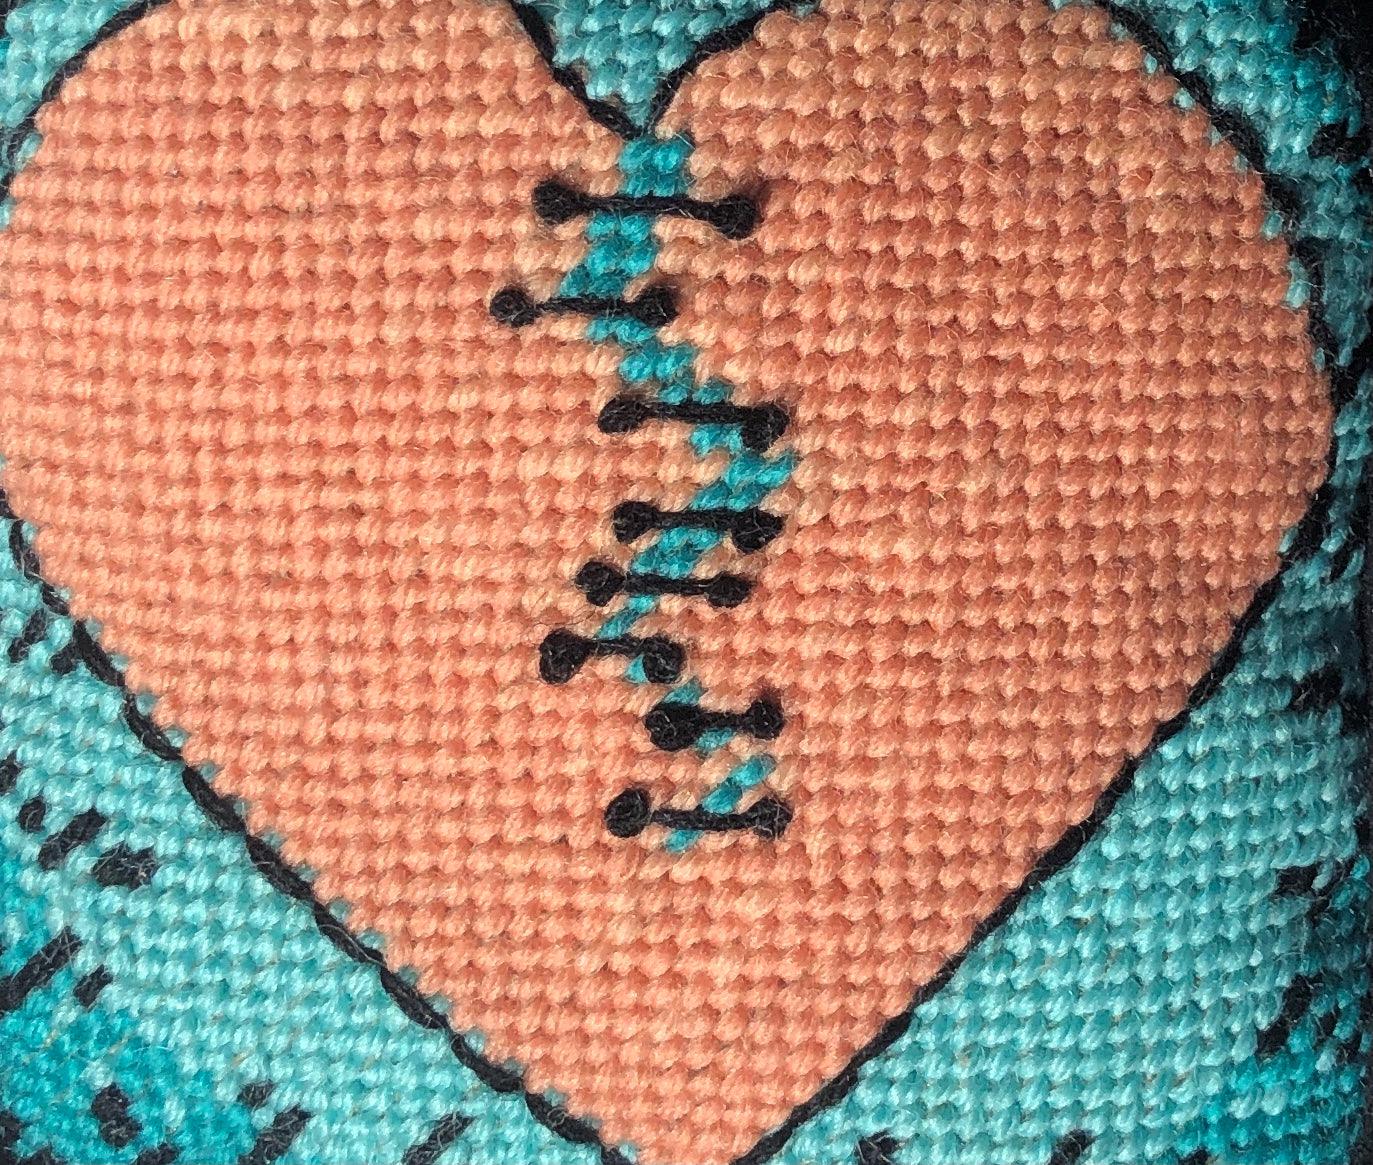 Variegated orange broken-heart pillow with turquoise background. Hand embroidered, one of a kind.